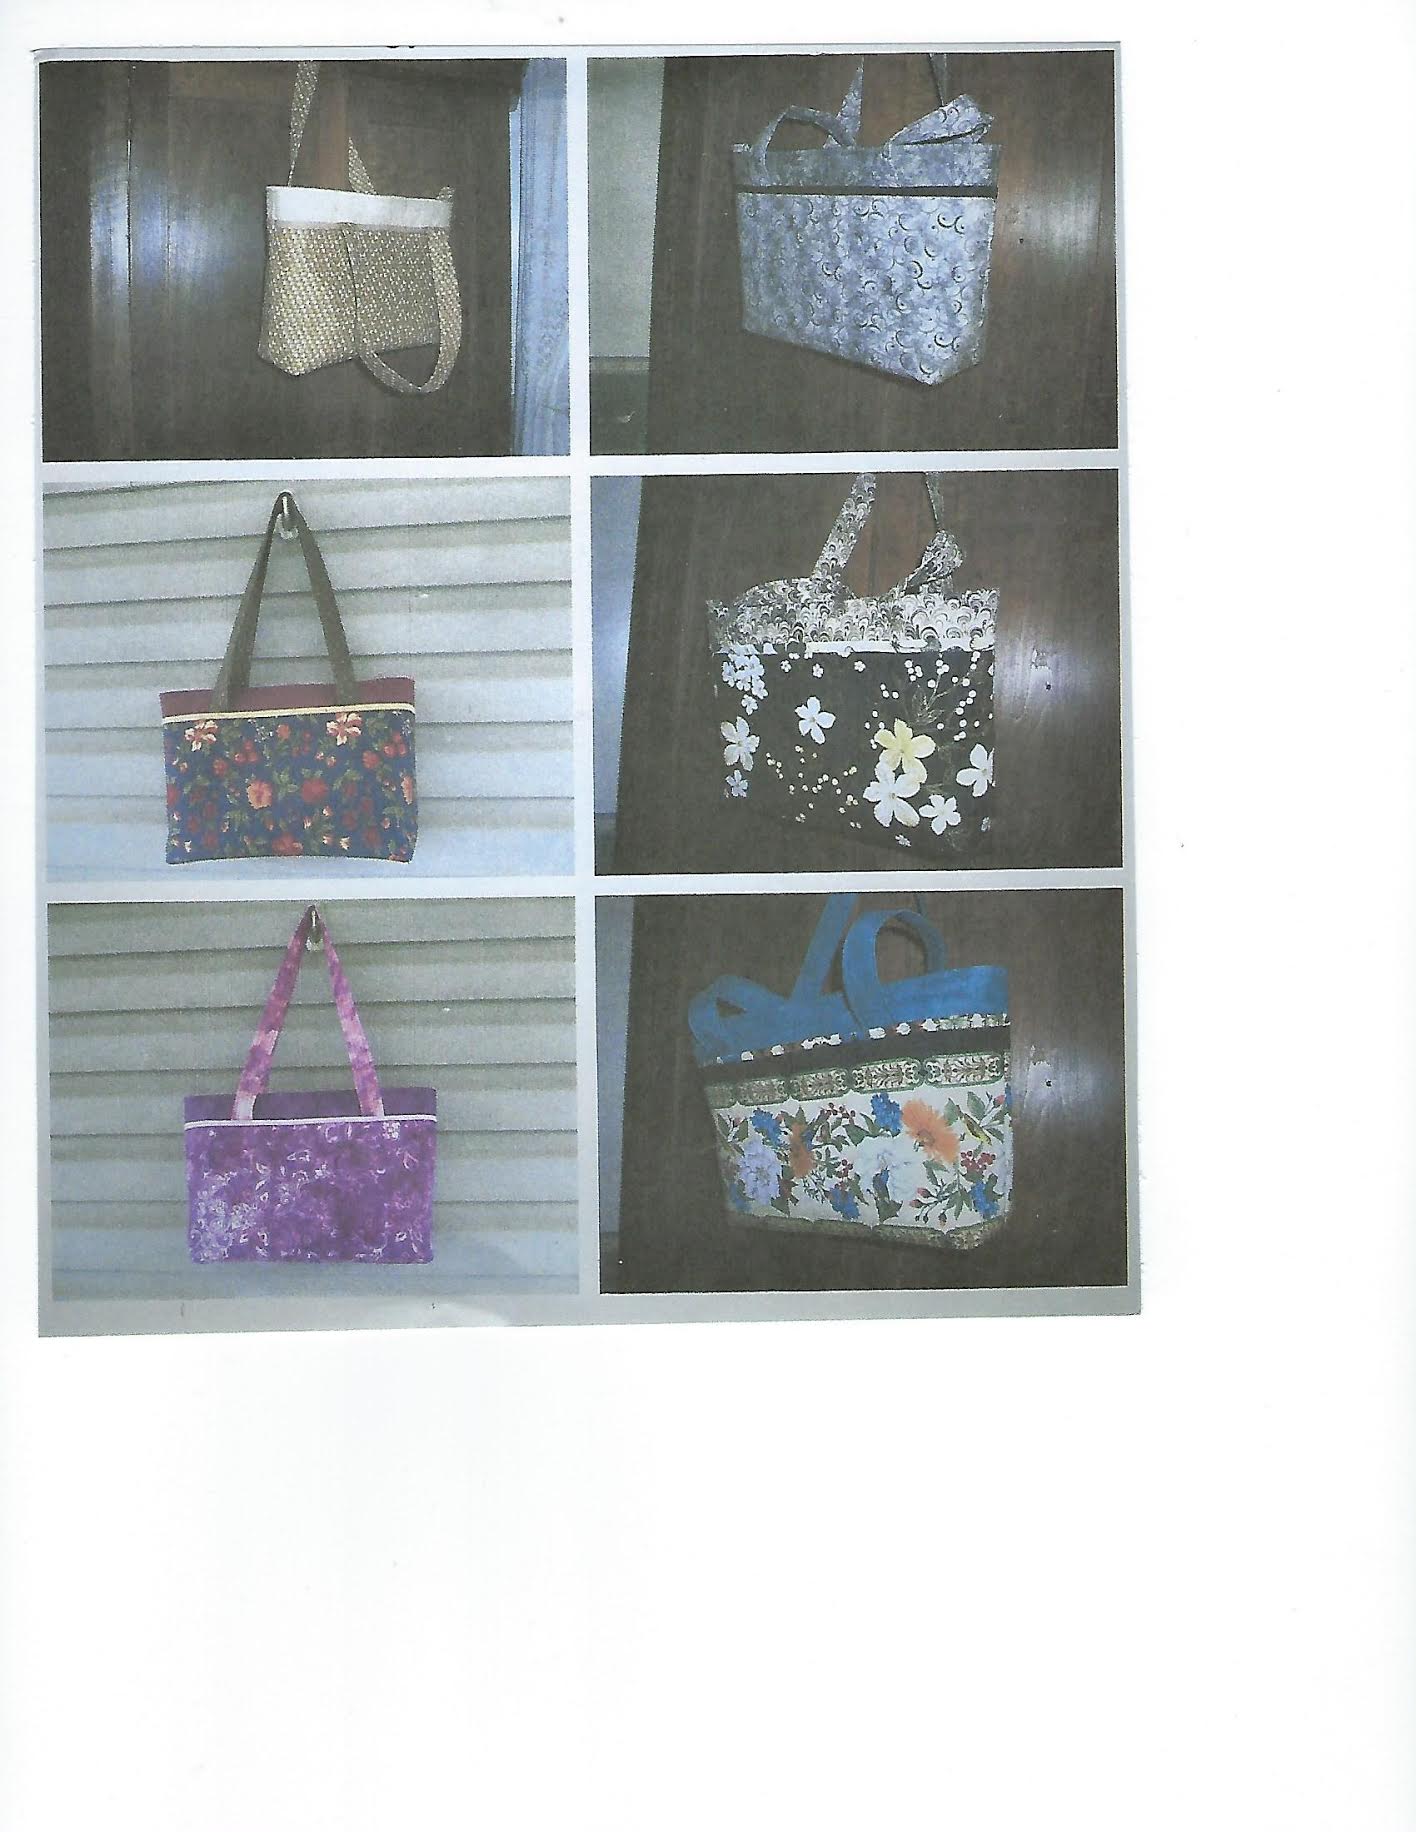 Photo of the riveria handbags to be made in class